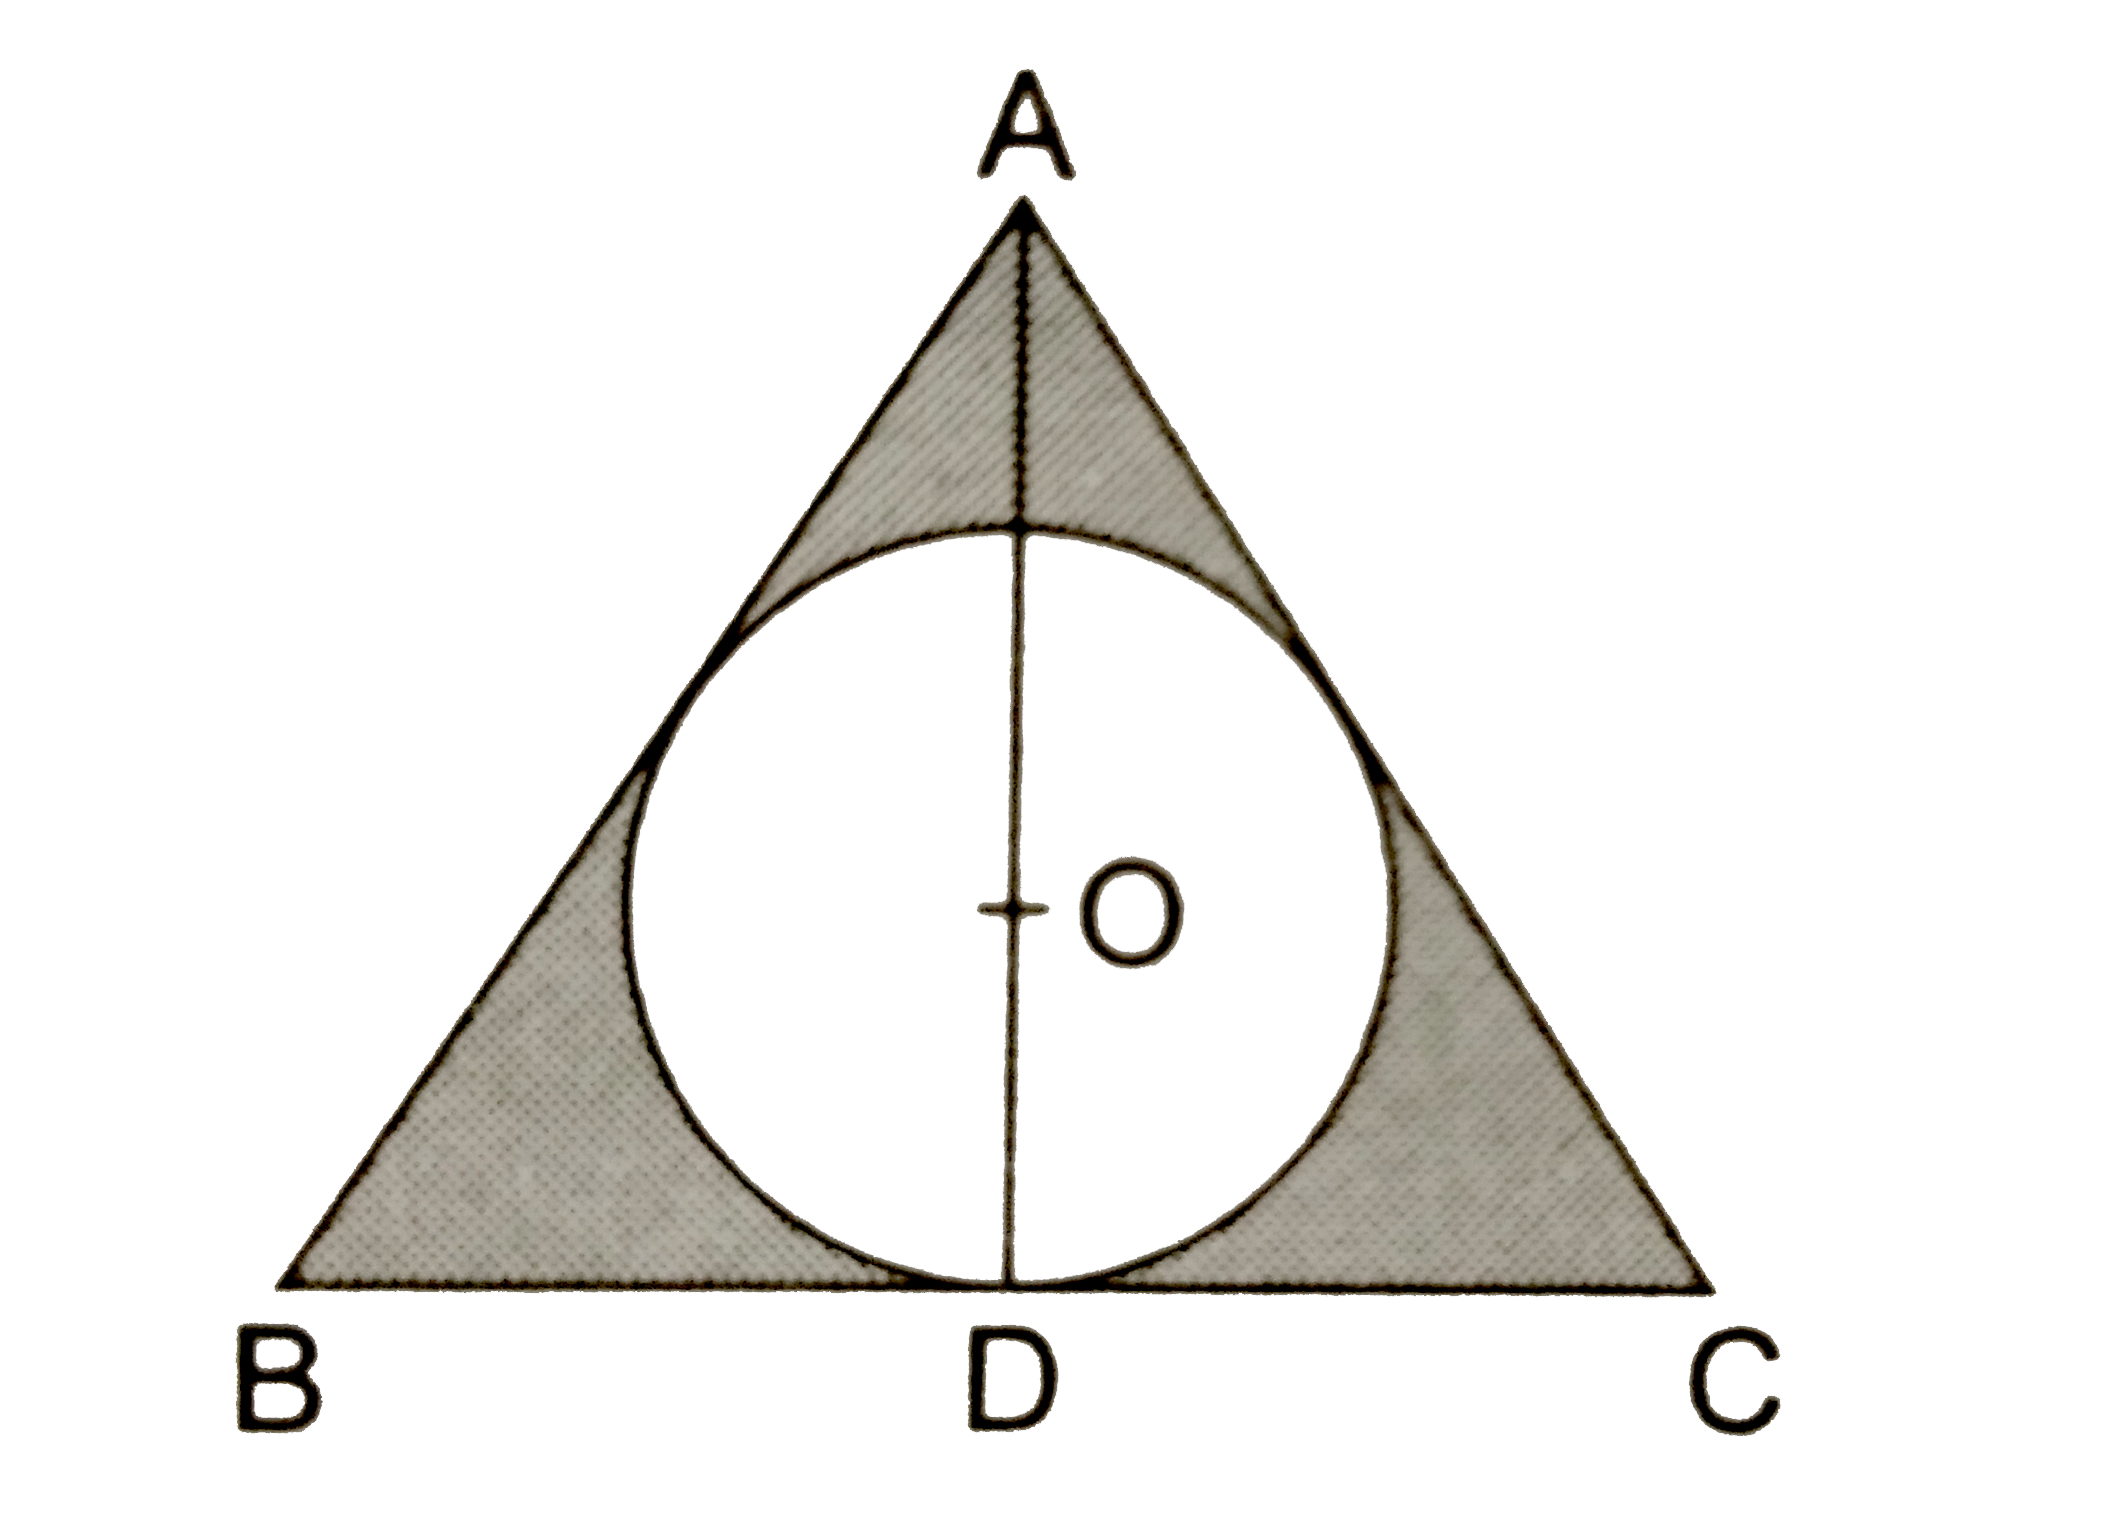 In the given figure, a circle is inscribed in an equilateral triangle ABC of side 12 cm. Find the radius of inscribed circle and the area of the shaded region. [Use sqrt(3)=1.73 and pi=3.14]